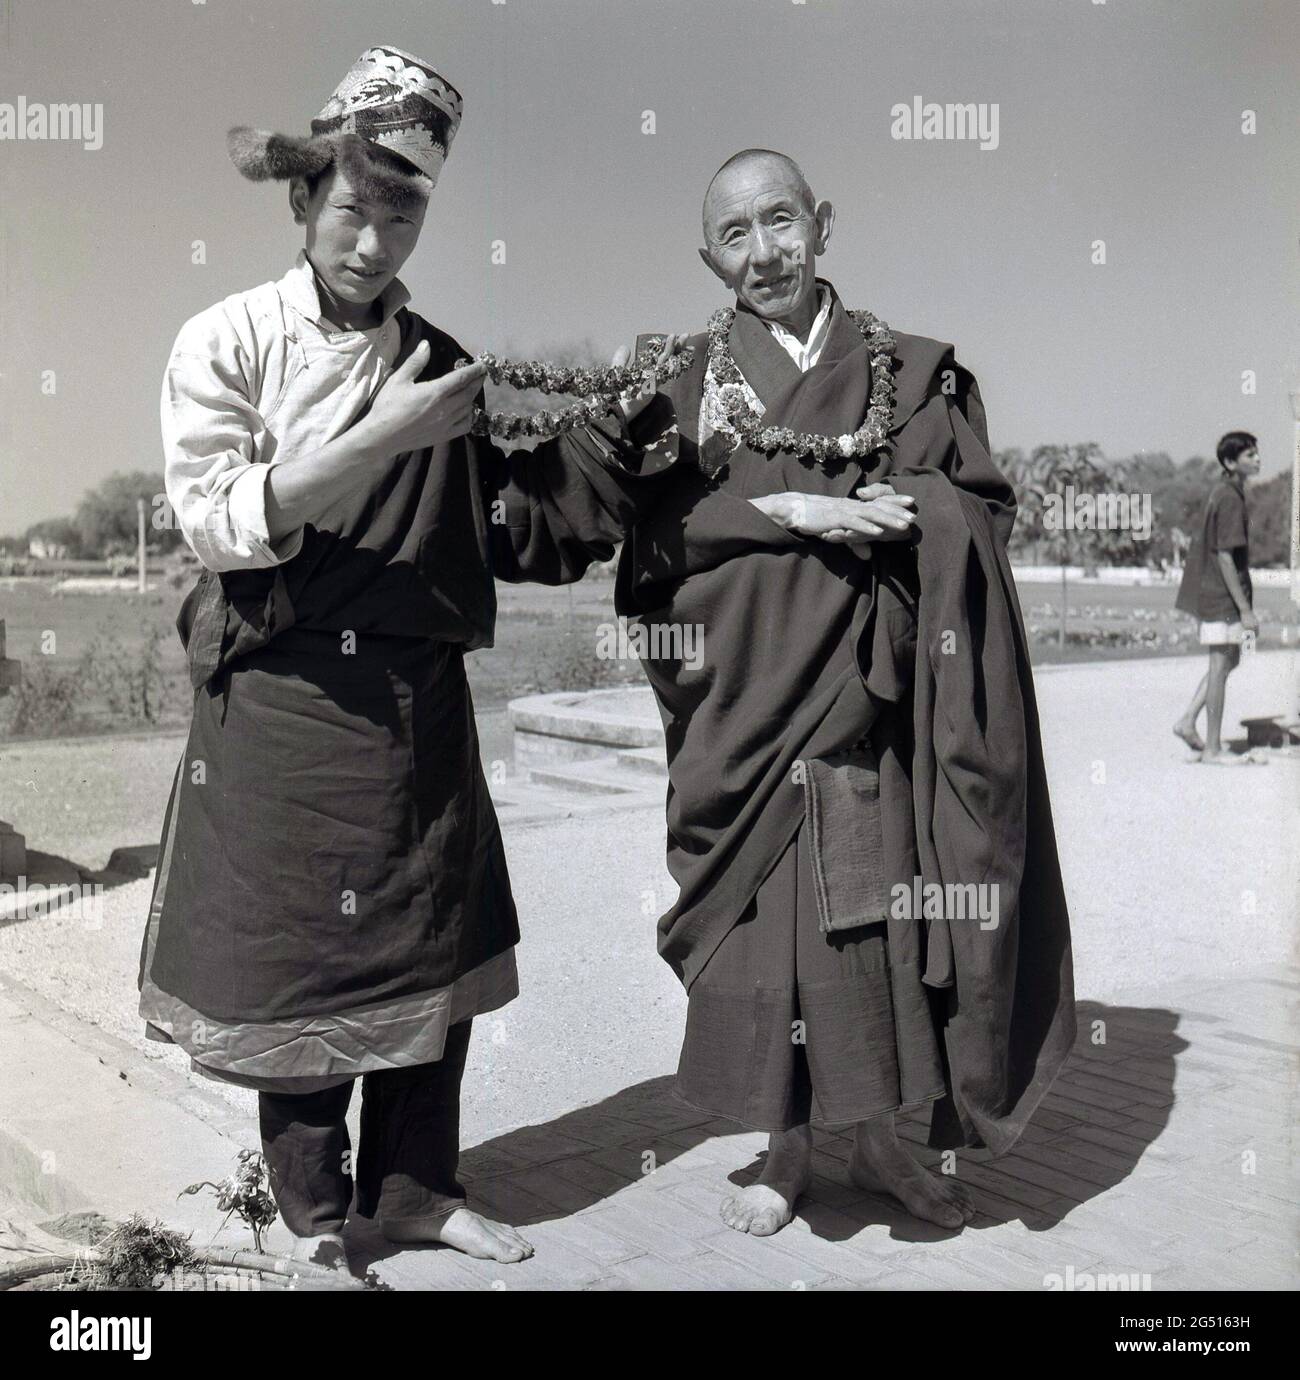 1950s, historical photo by J Allan Cash of a youth in robes and hat, standing with a monk outside the Buddhist temple, mulagandhakuti vihara, Sarnath, Varanasi, india. The young man is holding flower garlands or braids, which are worn around the neck and which he is offering to visitors. The temple was built in 1931 - on the site where the Buddha Gautama mediated during his first rainy season - by Angarika Dharmapala and is maintained and run by the Mahabodhi Society of which he founded. Stock Photo